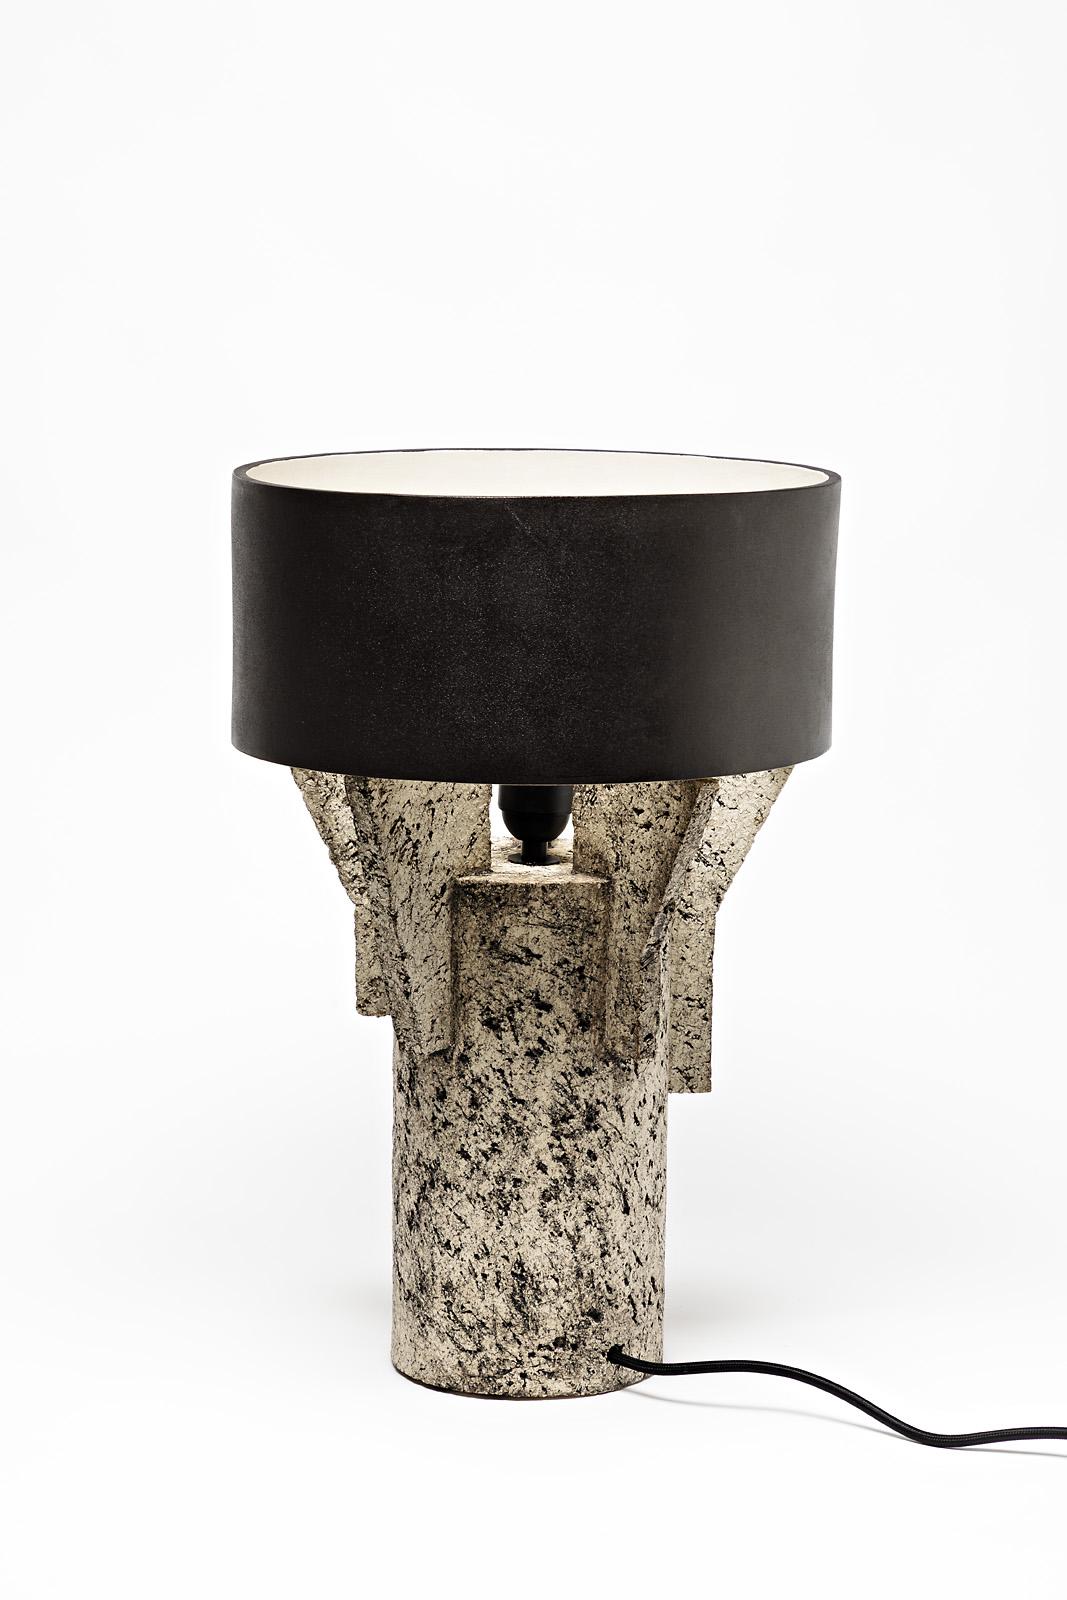 Beaux Arts Ceramic Table Lamp by Denis Castaing with Brown Glaze Decoration, 2019 For Sale